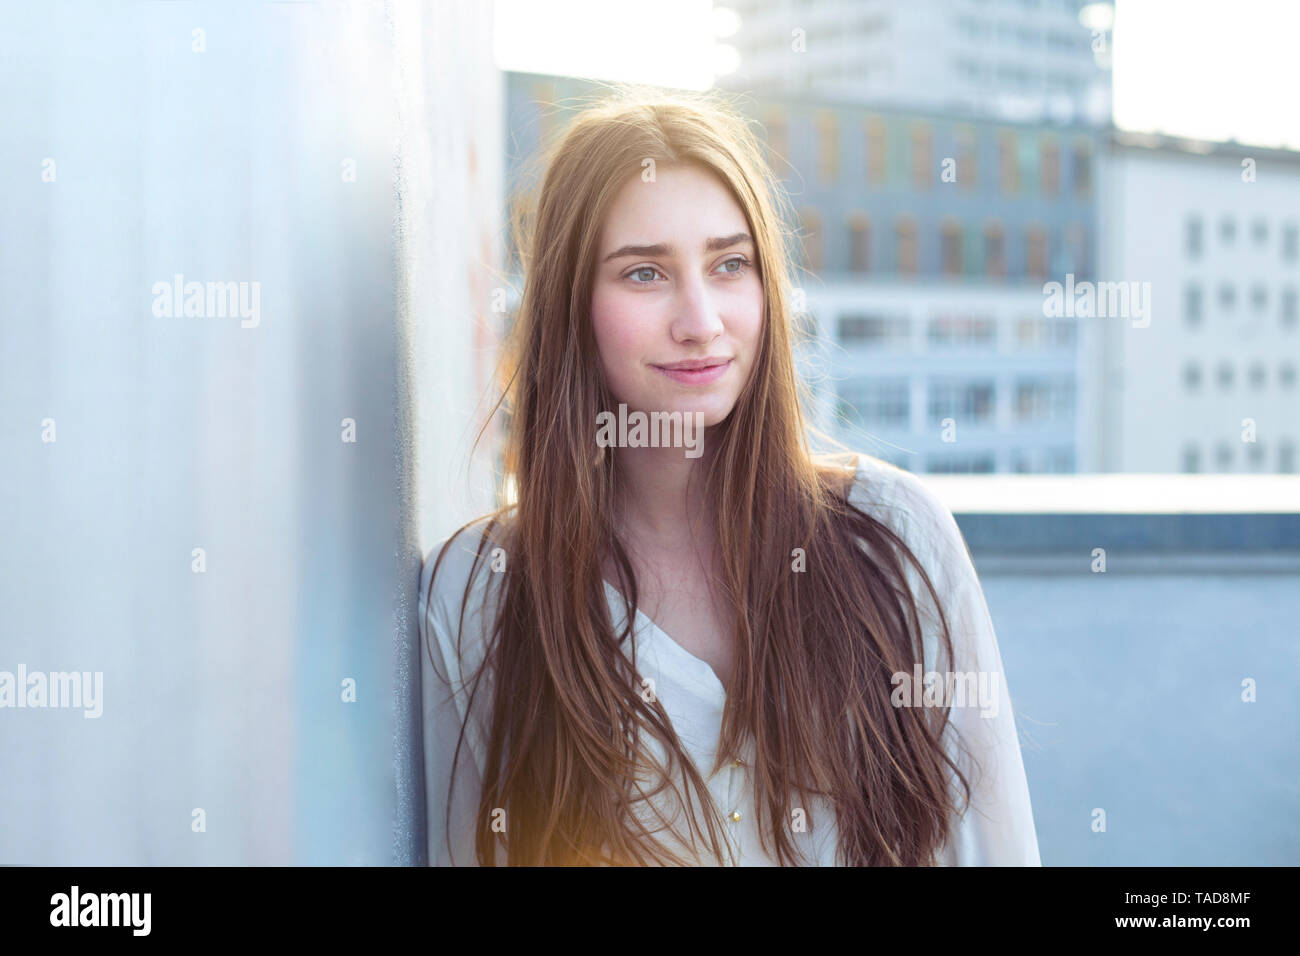 Portrait of smiling young woman leaning against a wall Banque D'Images